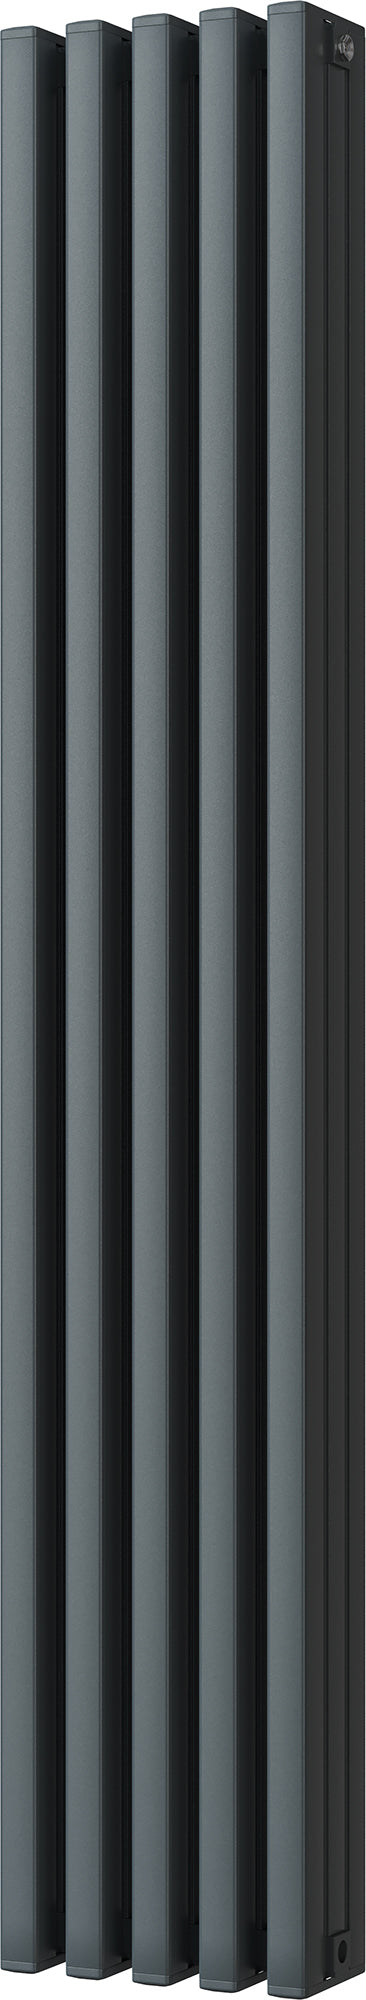 Temple - Anthracite Vertical Square Tube Column Radiator H1800mm x W322mm